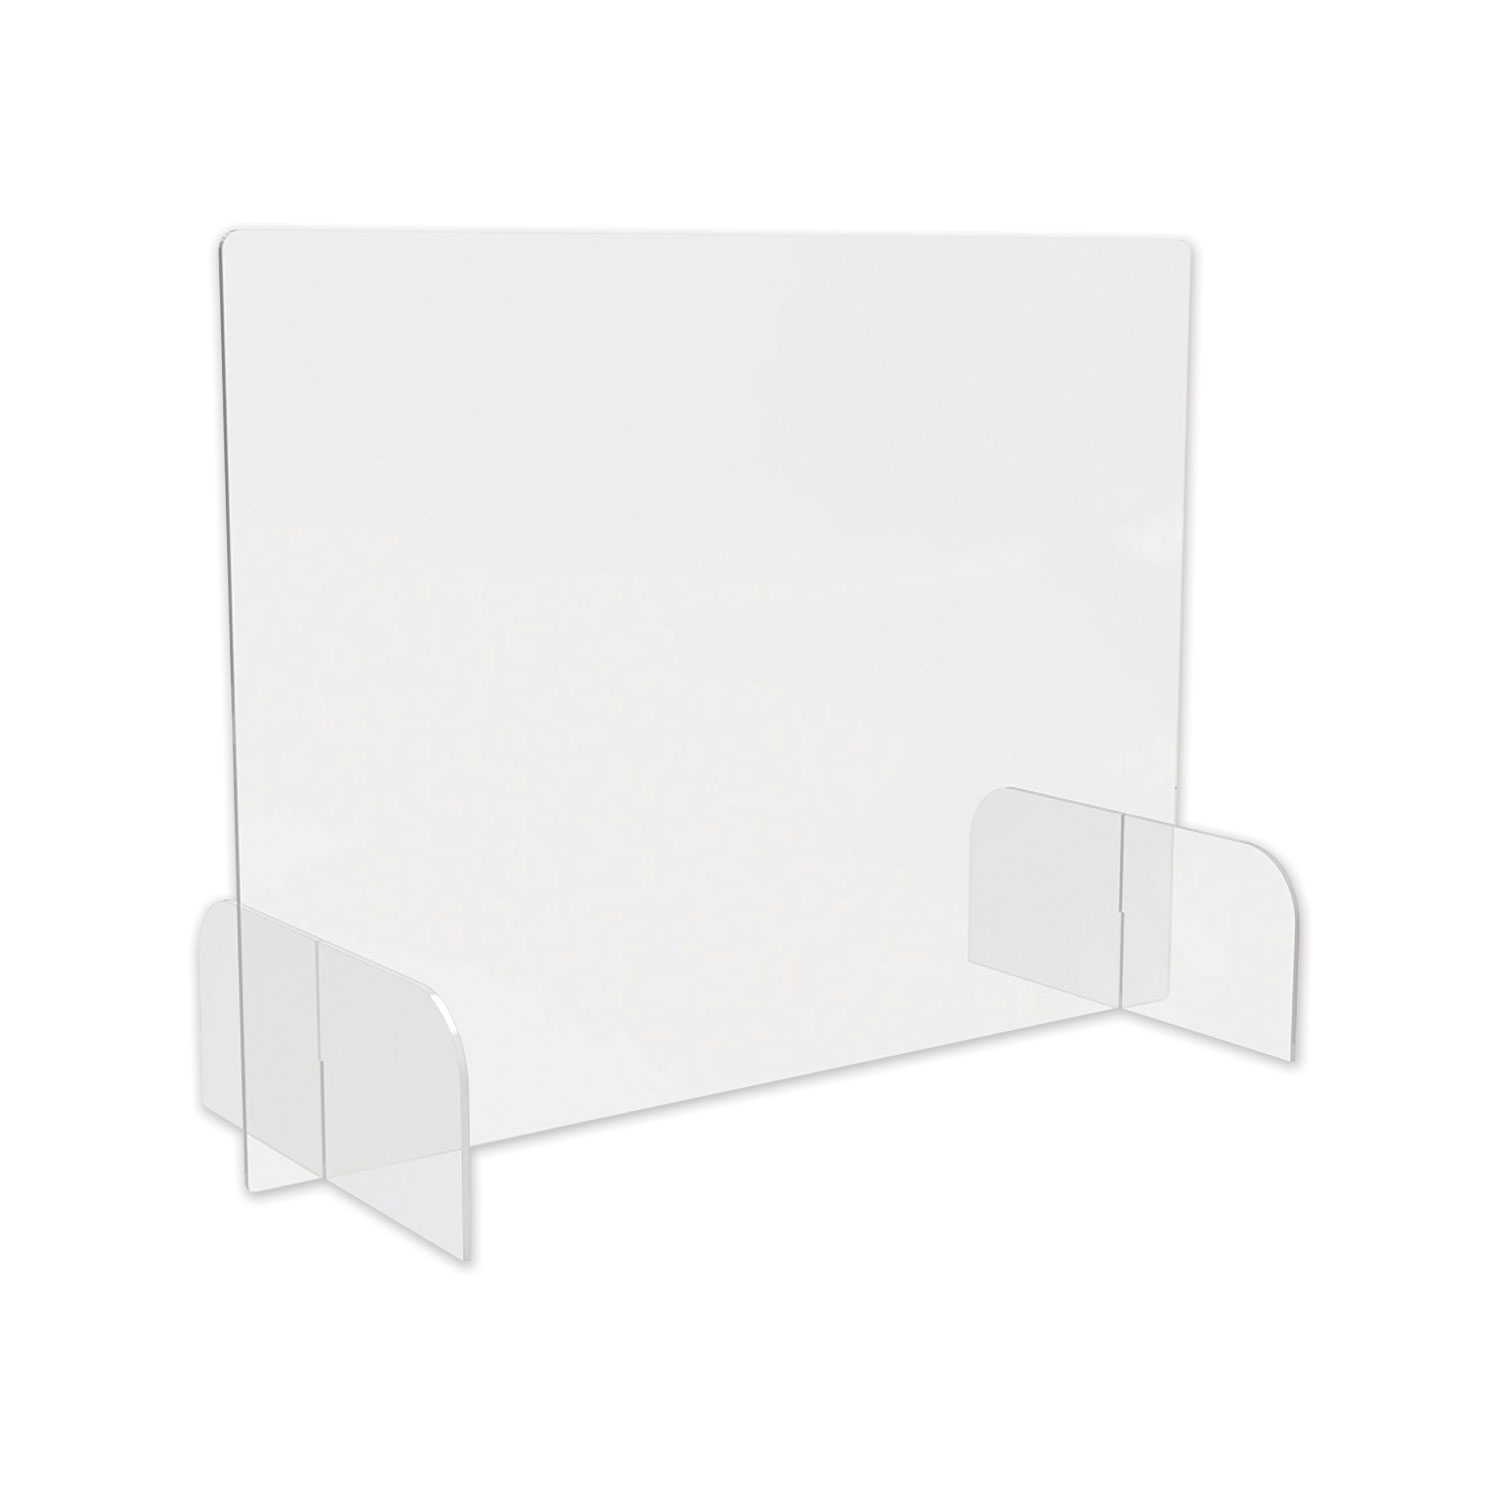  deflecto PBCTA3123B Counter Top Barrier with Full Shield and Feet, 31 x 14 x 23, Acrylic, Clear, 2/Carton (DEFPBCTA3123B) 